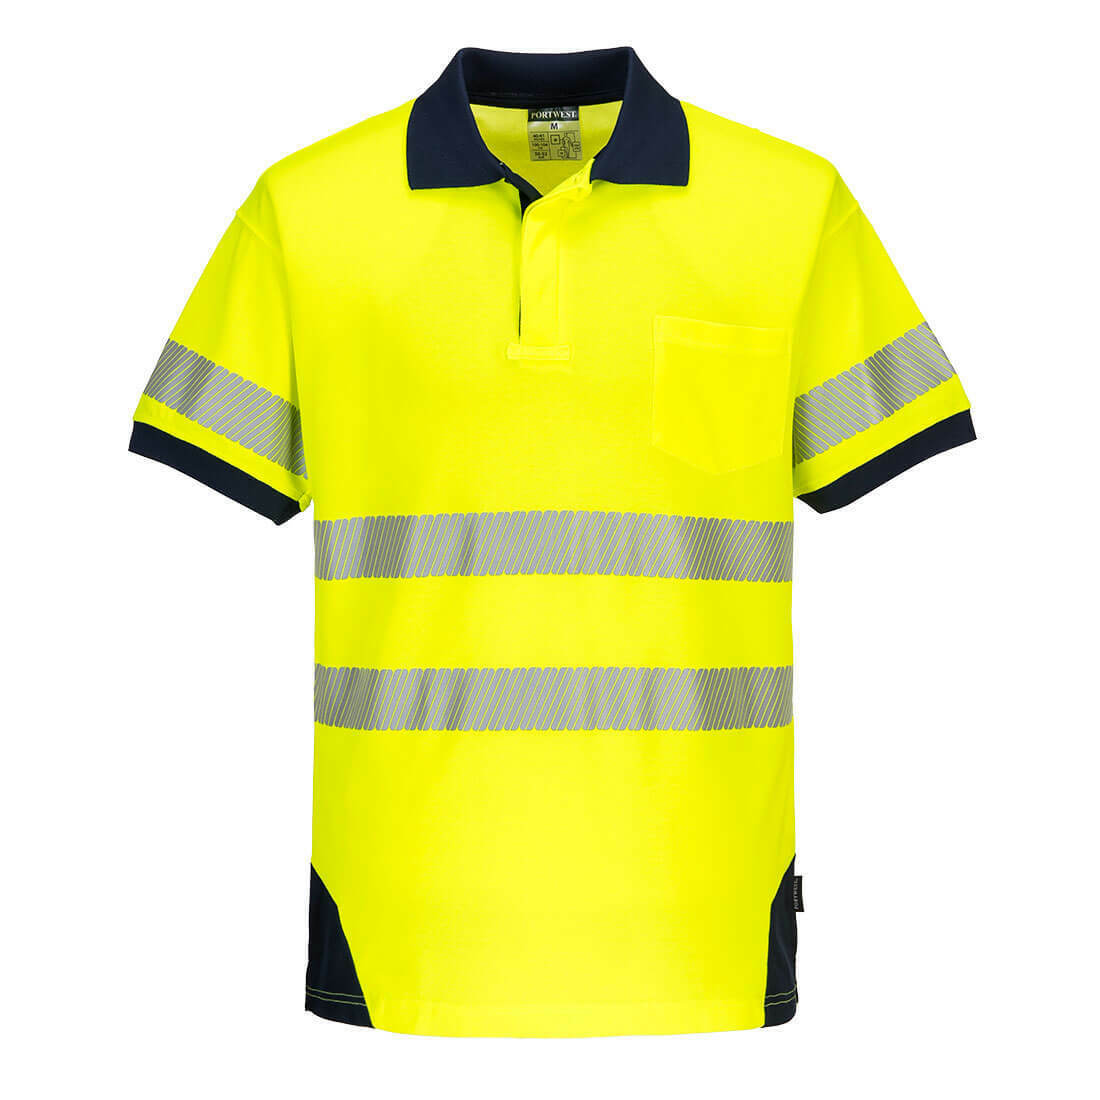 Portwest Mens PW3 Hi-Vis Polo Short Sleeve Cool Dry Comfy Taped Work Shirt T182